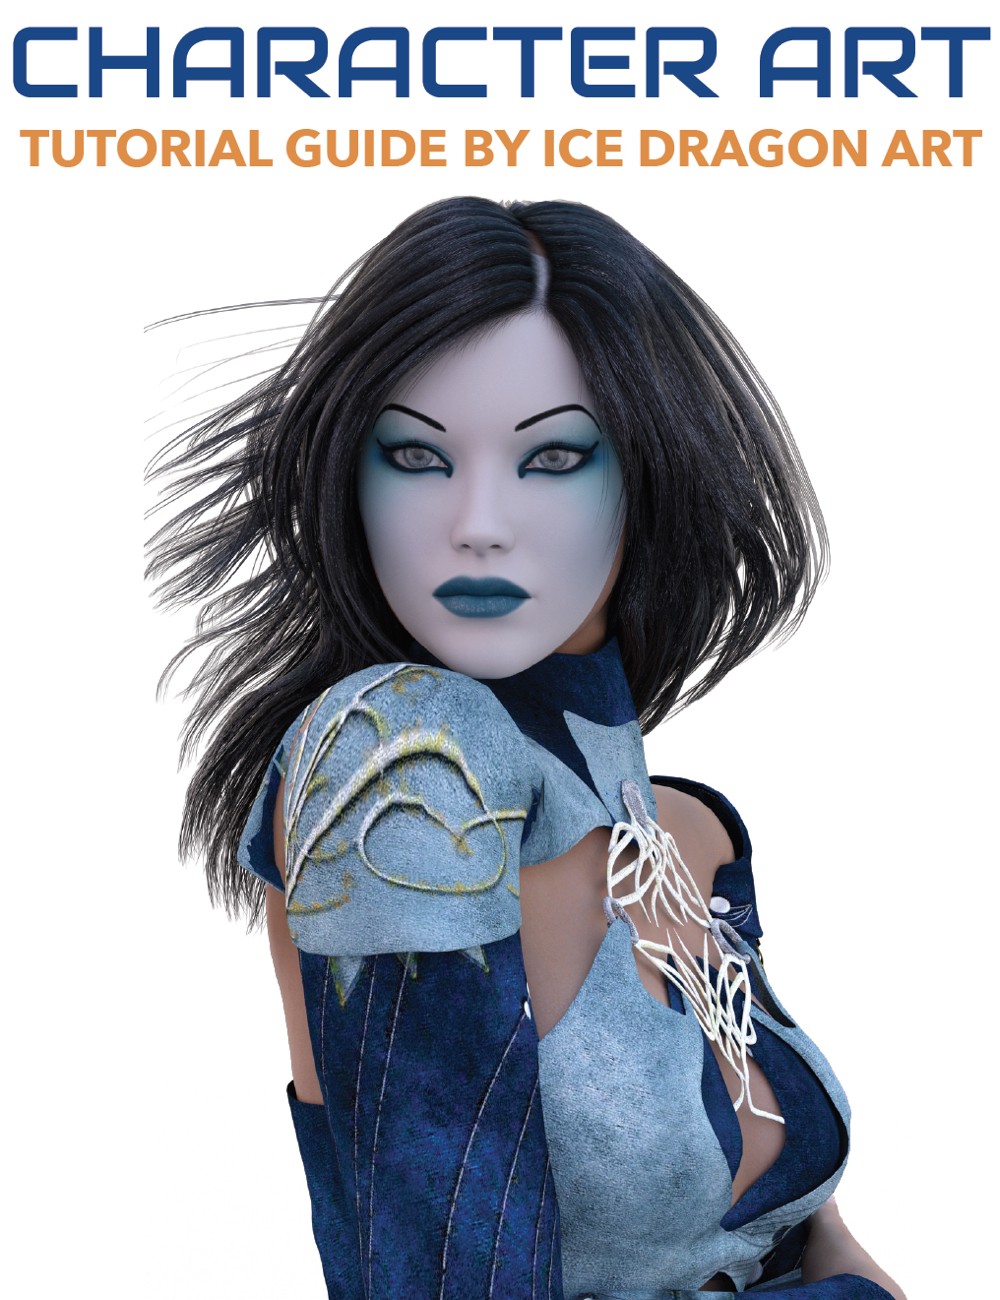 Character Art   A Tutorial Guide by Ice Dragon Art